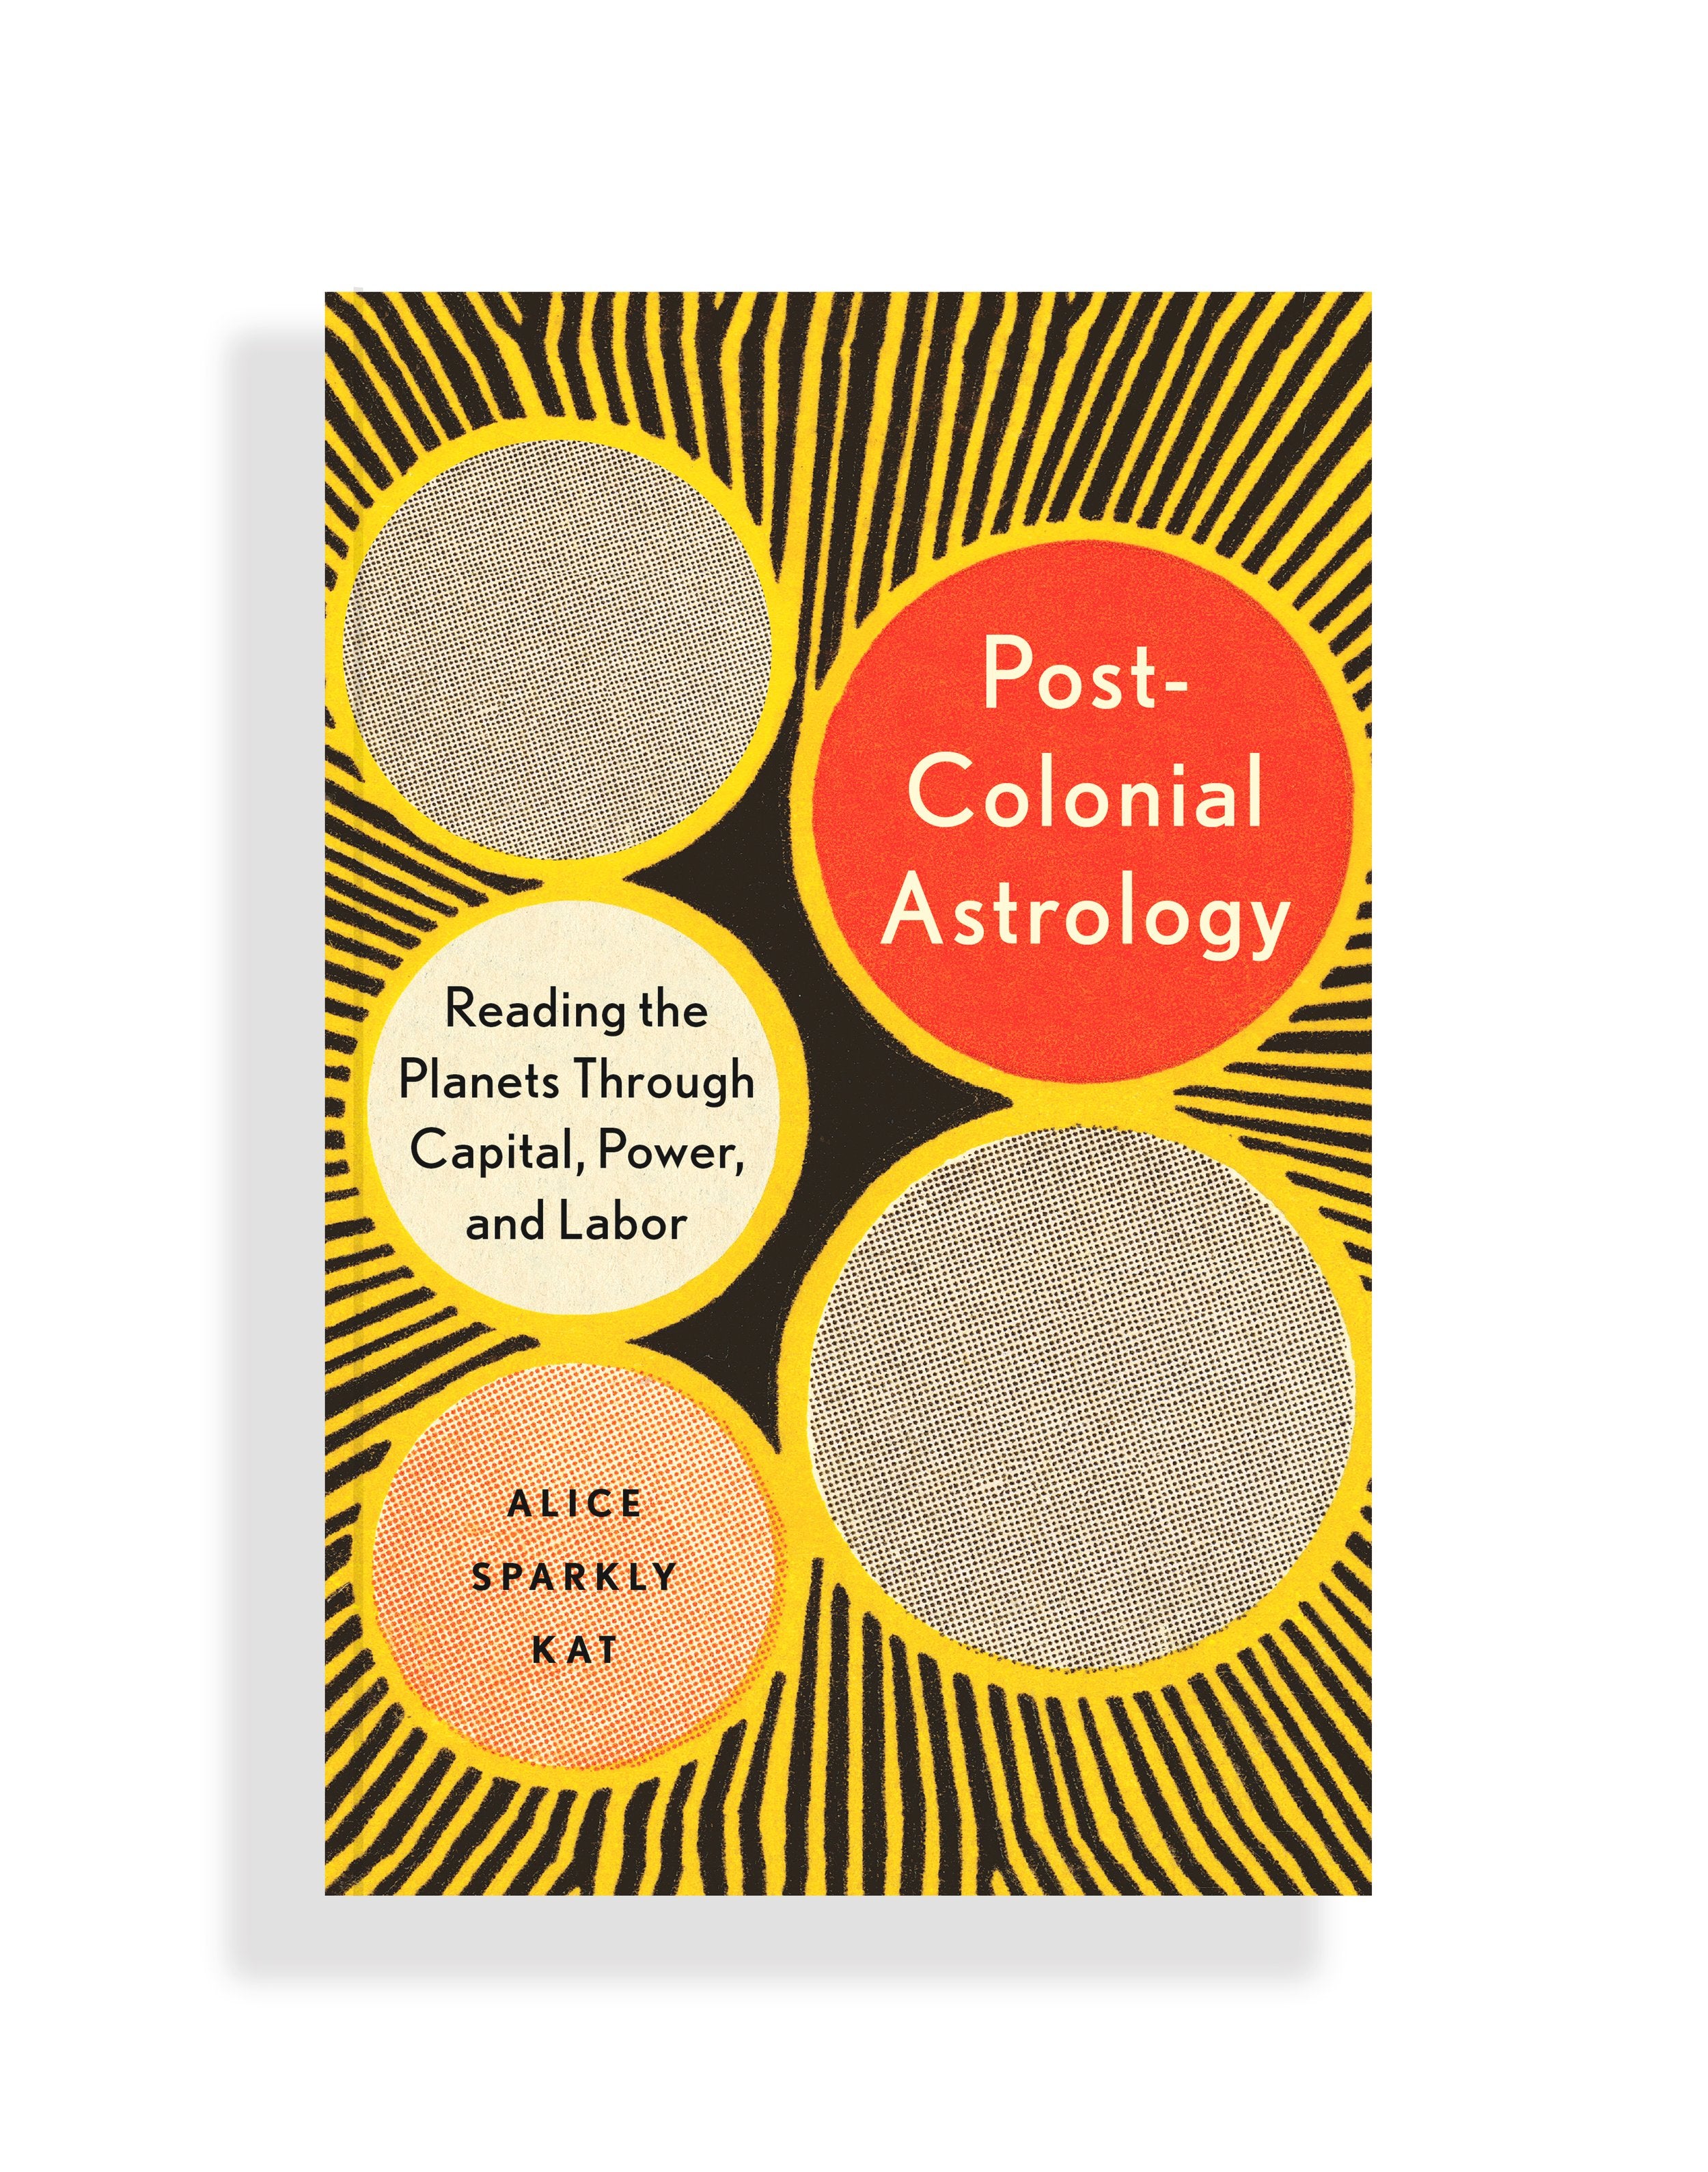 Post-Colonial Astrology